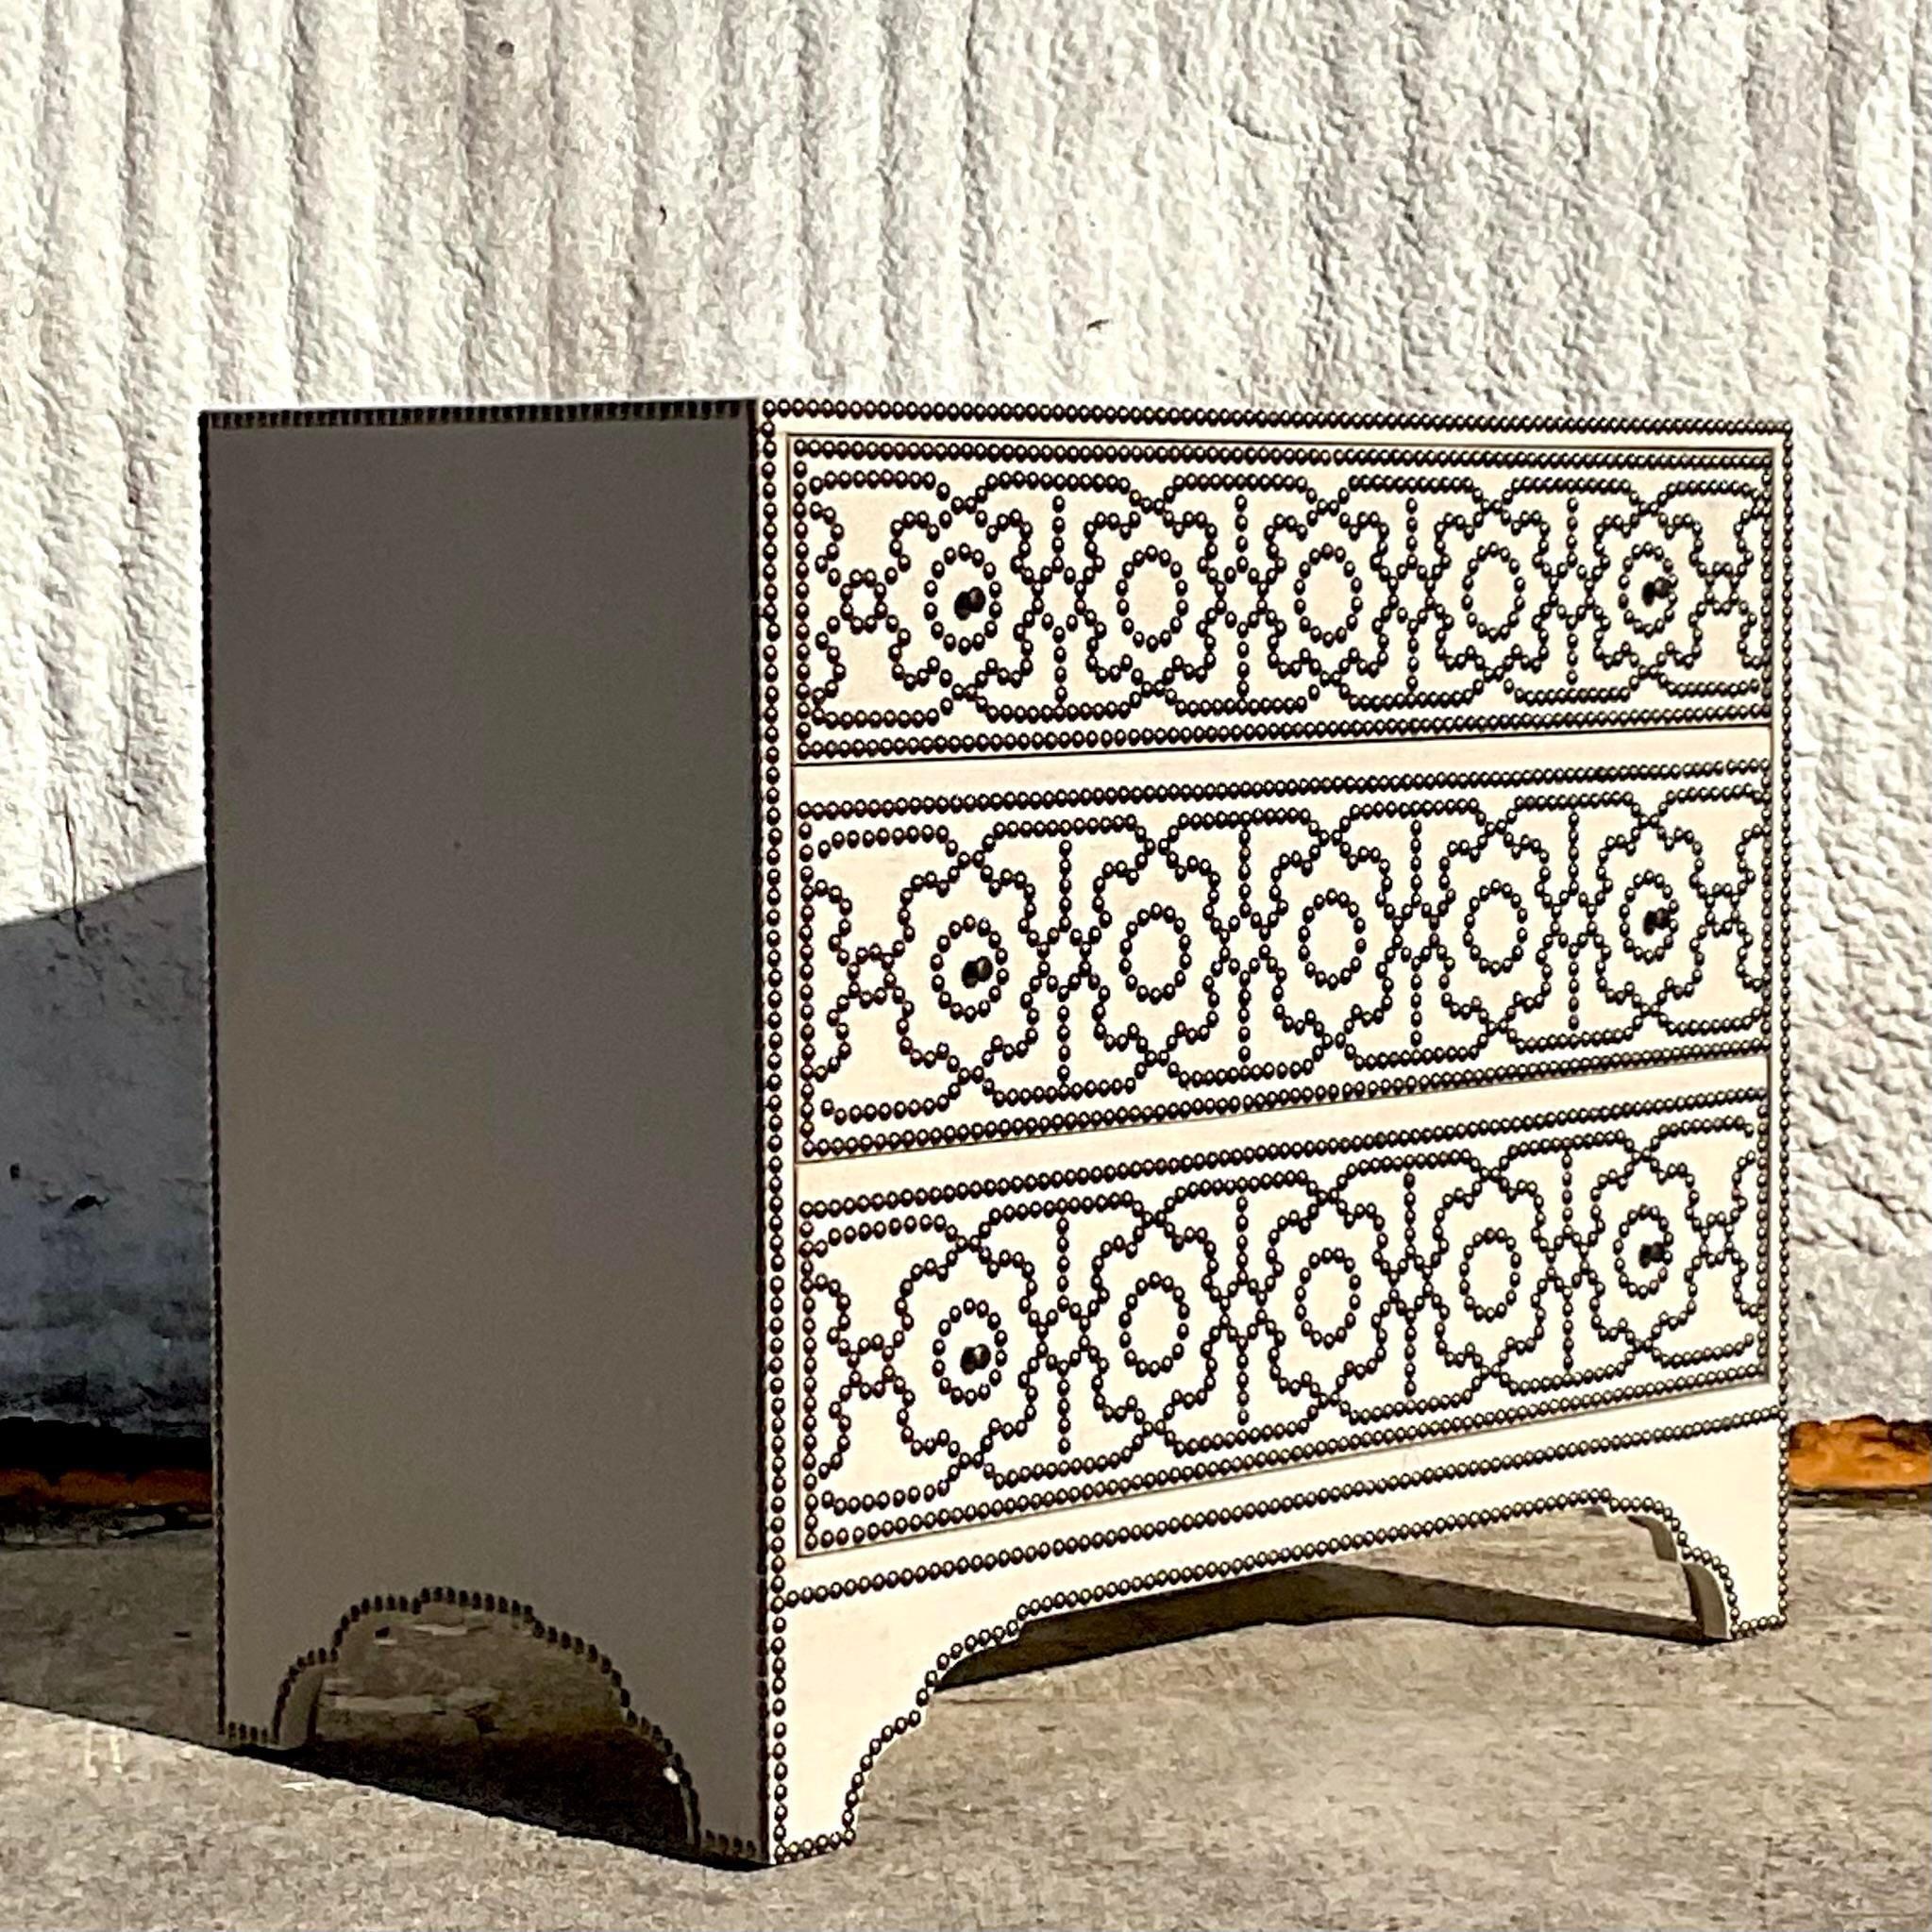 A fabulous vintage Contemporary chest of drawers. Made by the Bernhardt group and tagged inside the drawer. A beautiful linen wrapped cabinet with chic Moorish nailhead trim on the drawer fronts. Acquired from a Palm Beach estate.